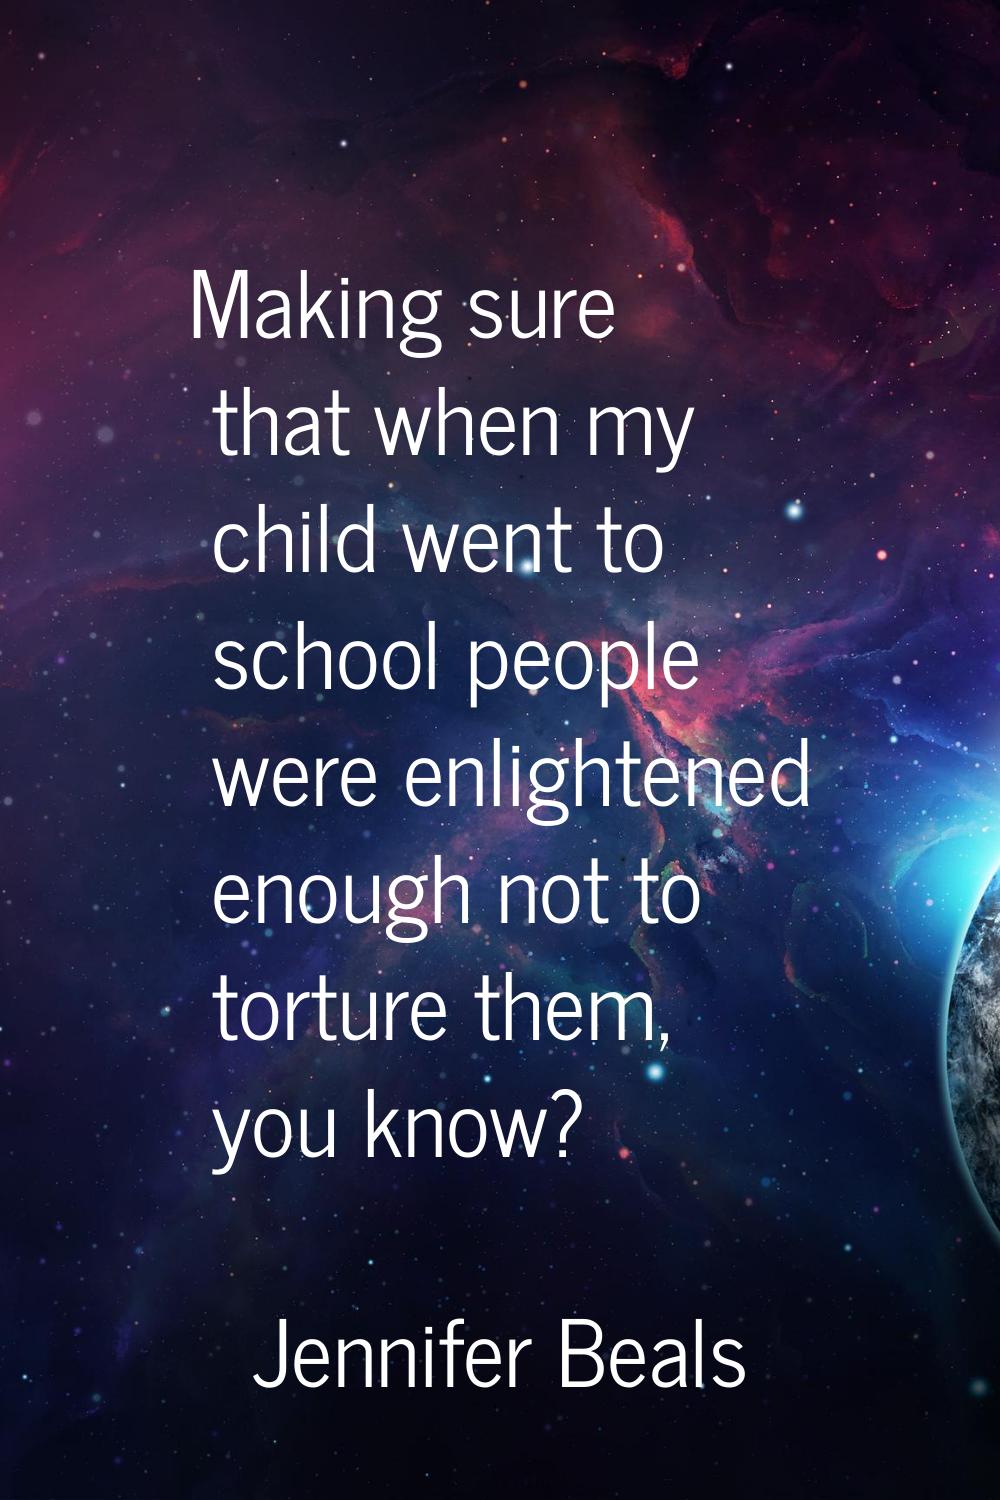 Making sure that when my child went to school people were enlightened enough not to torture them, y